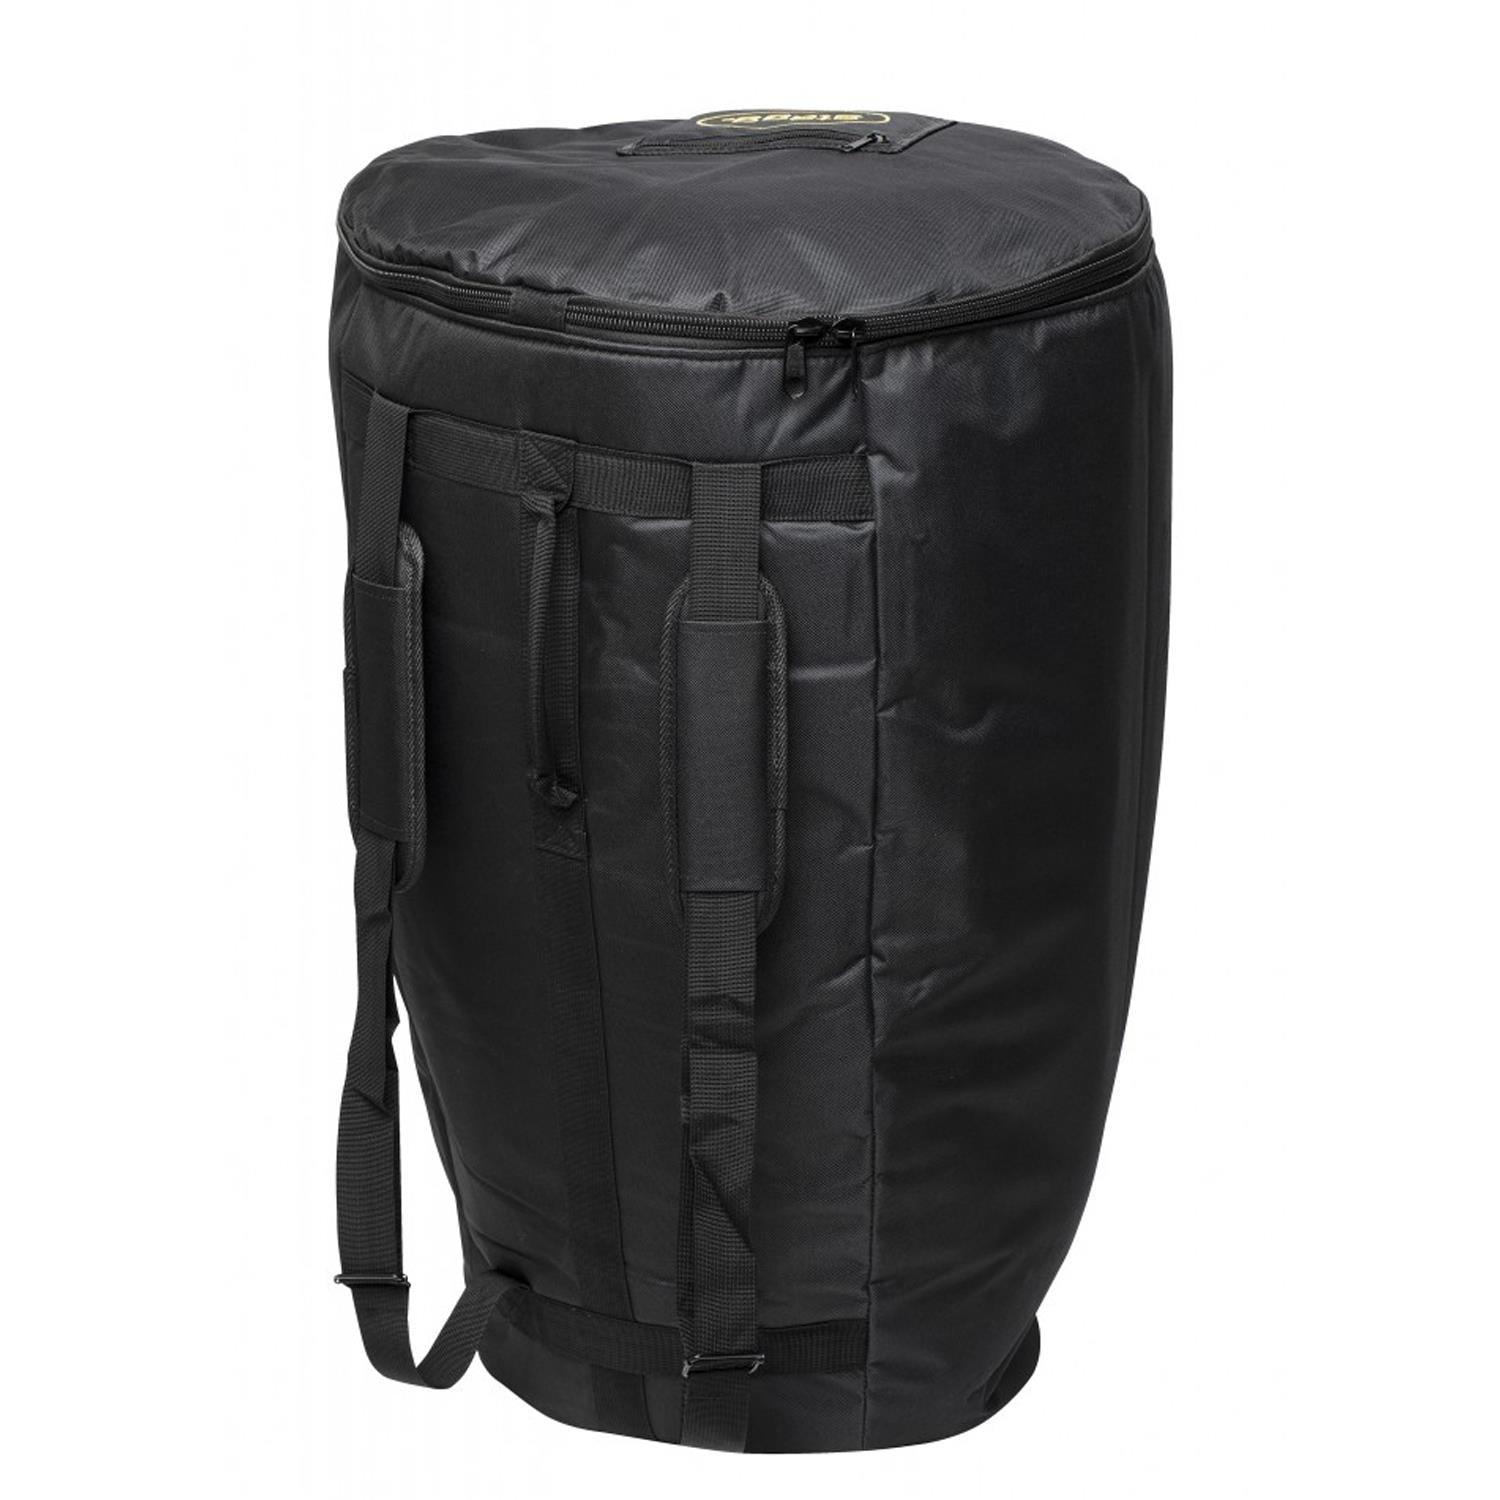 Stagg CGB-13 BK 13" Conga Carry Bag - DY Pro Audio